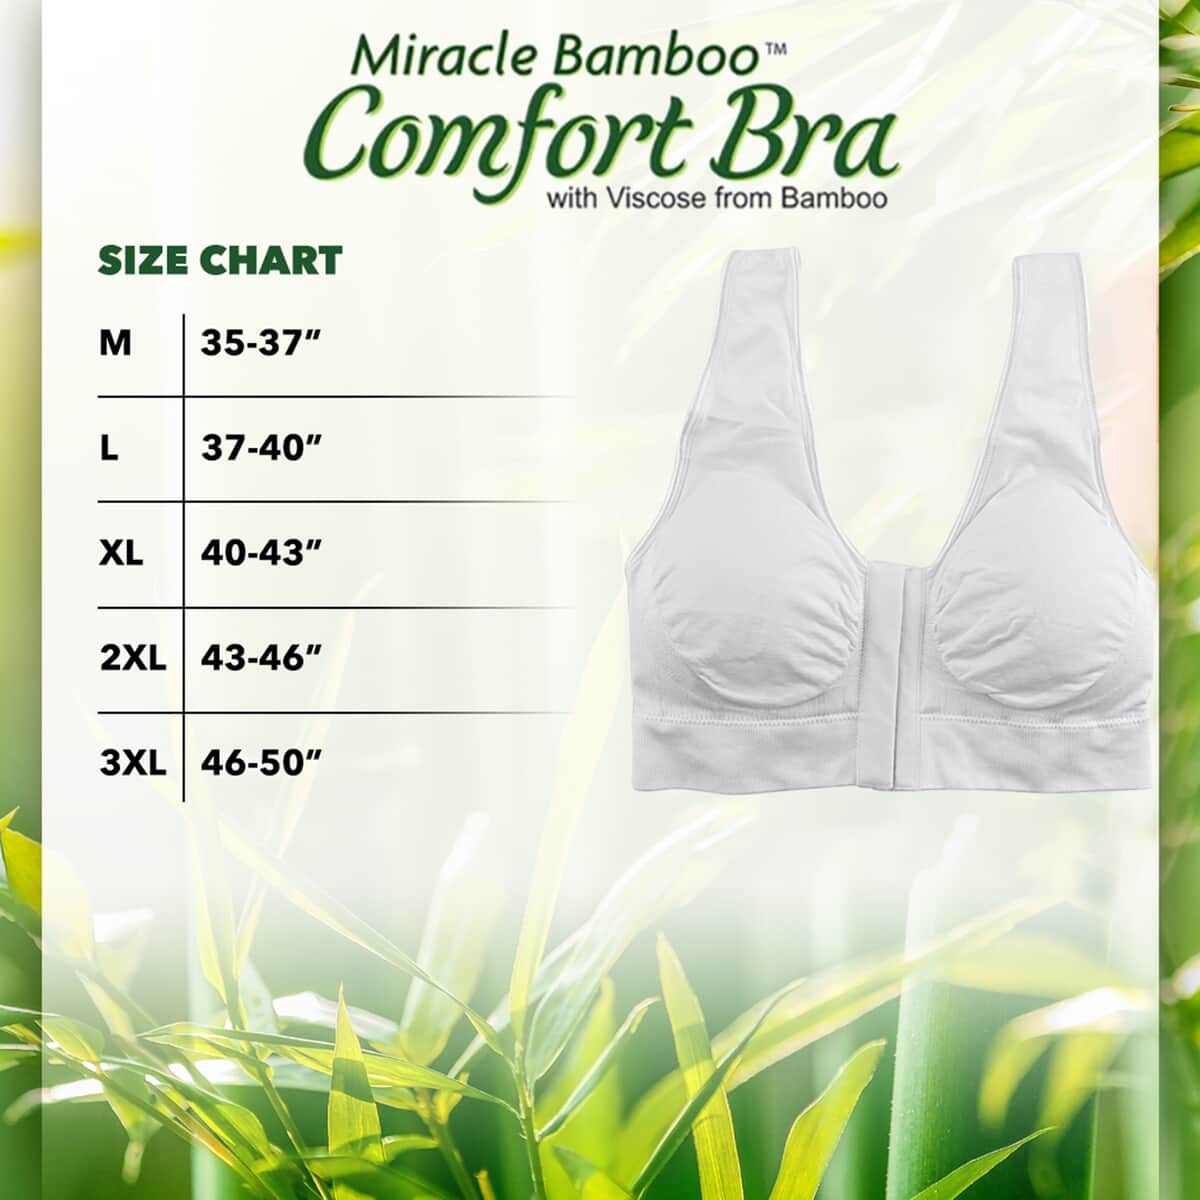 Miracle Bamboo Beyond Comfort Bra Set of 3 Front Closure Bras - Black, Beige and White - Size M image number 3